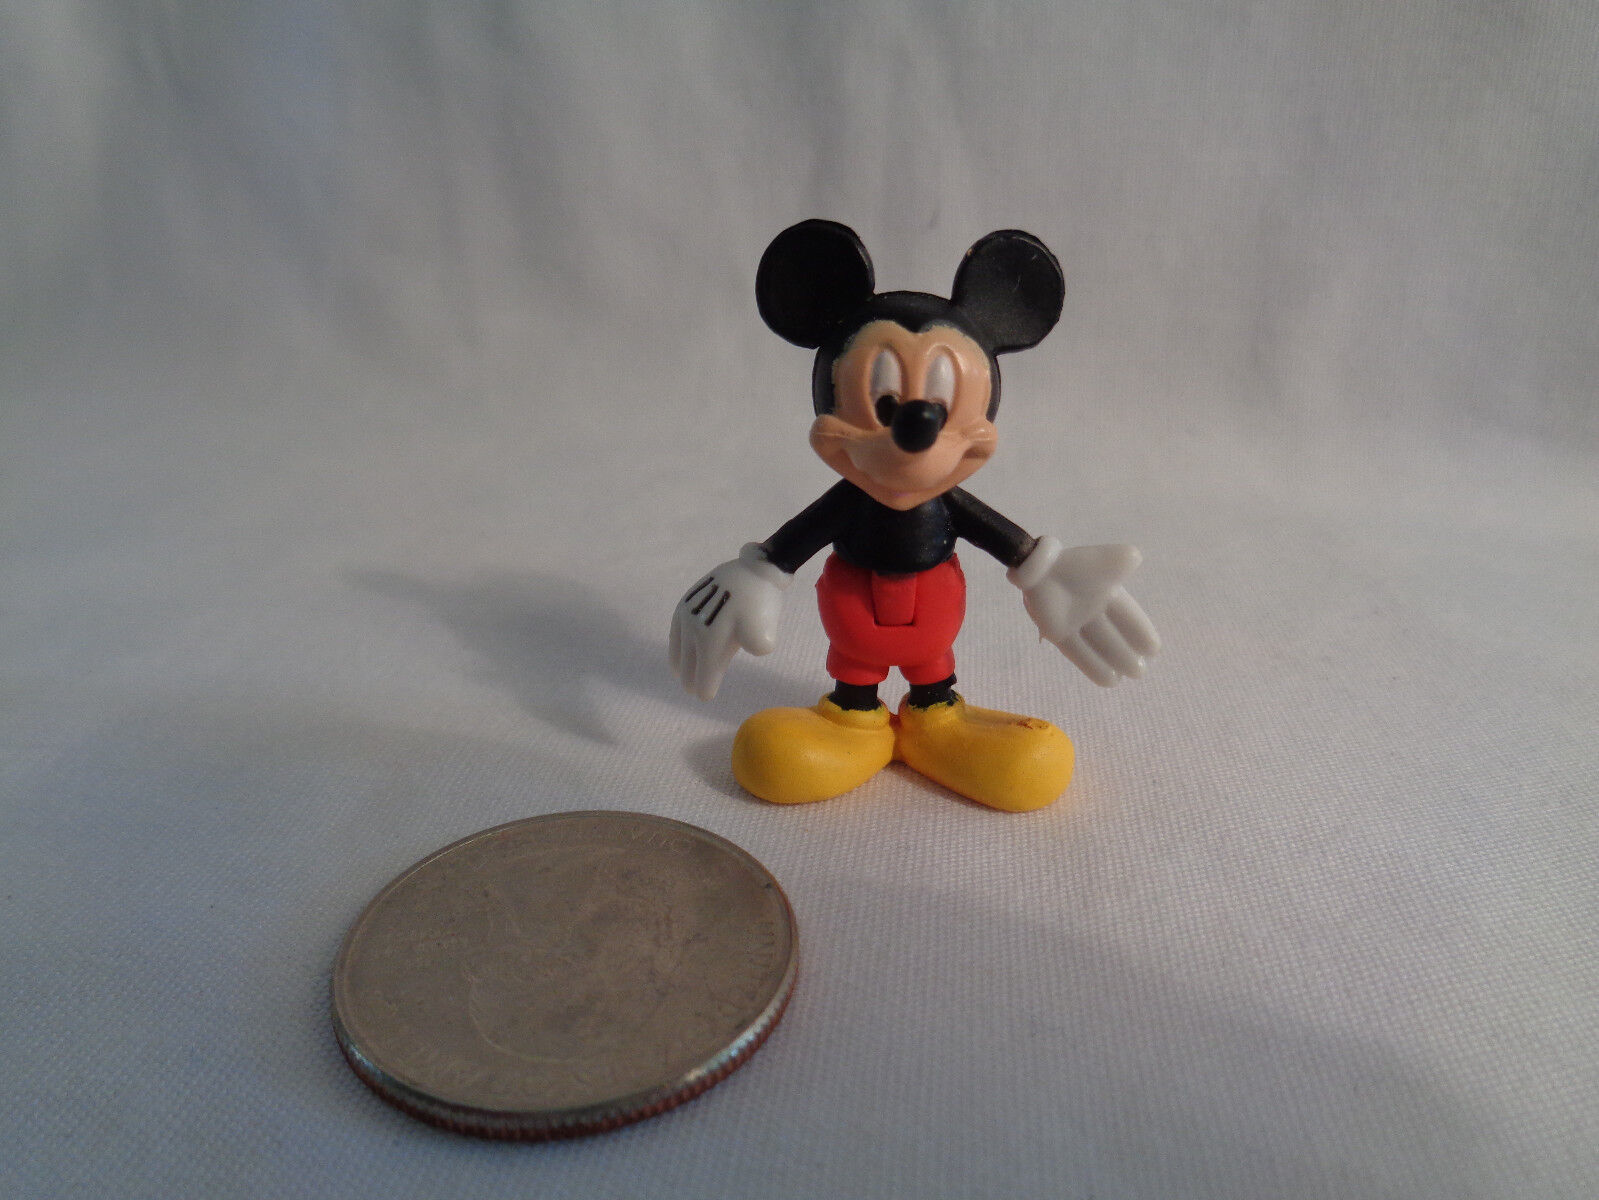 Disney Mickey Mouse Clubhouse Mickey Figure Bends at Waist - $2.91